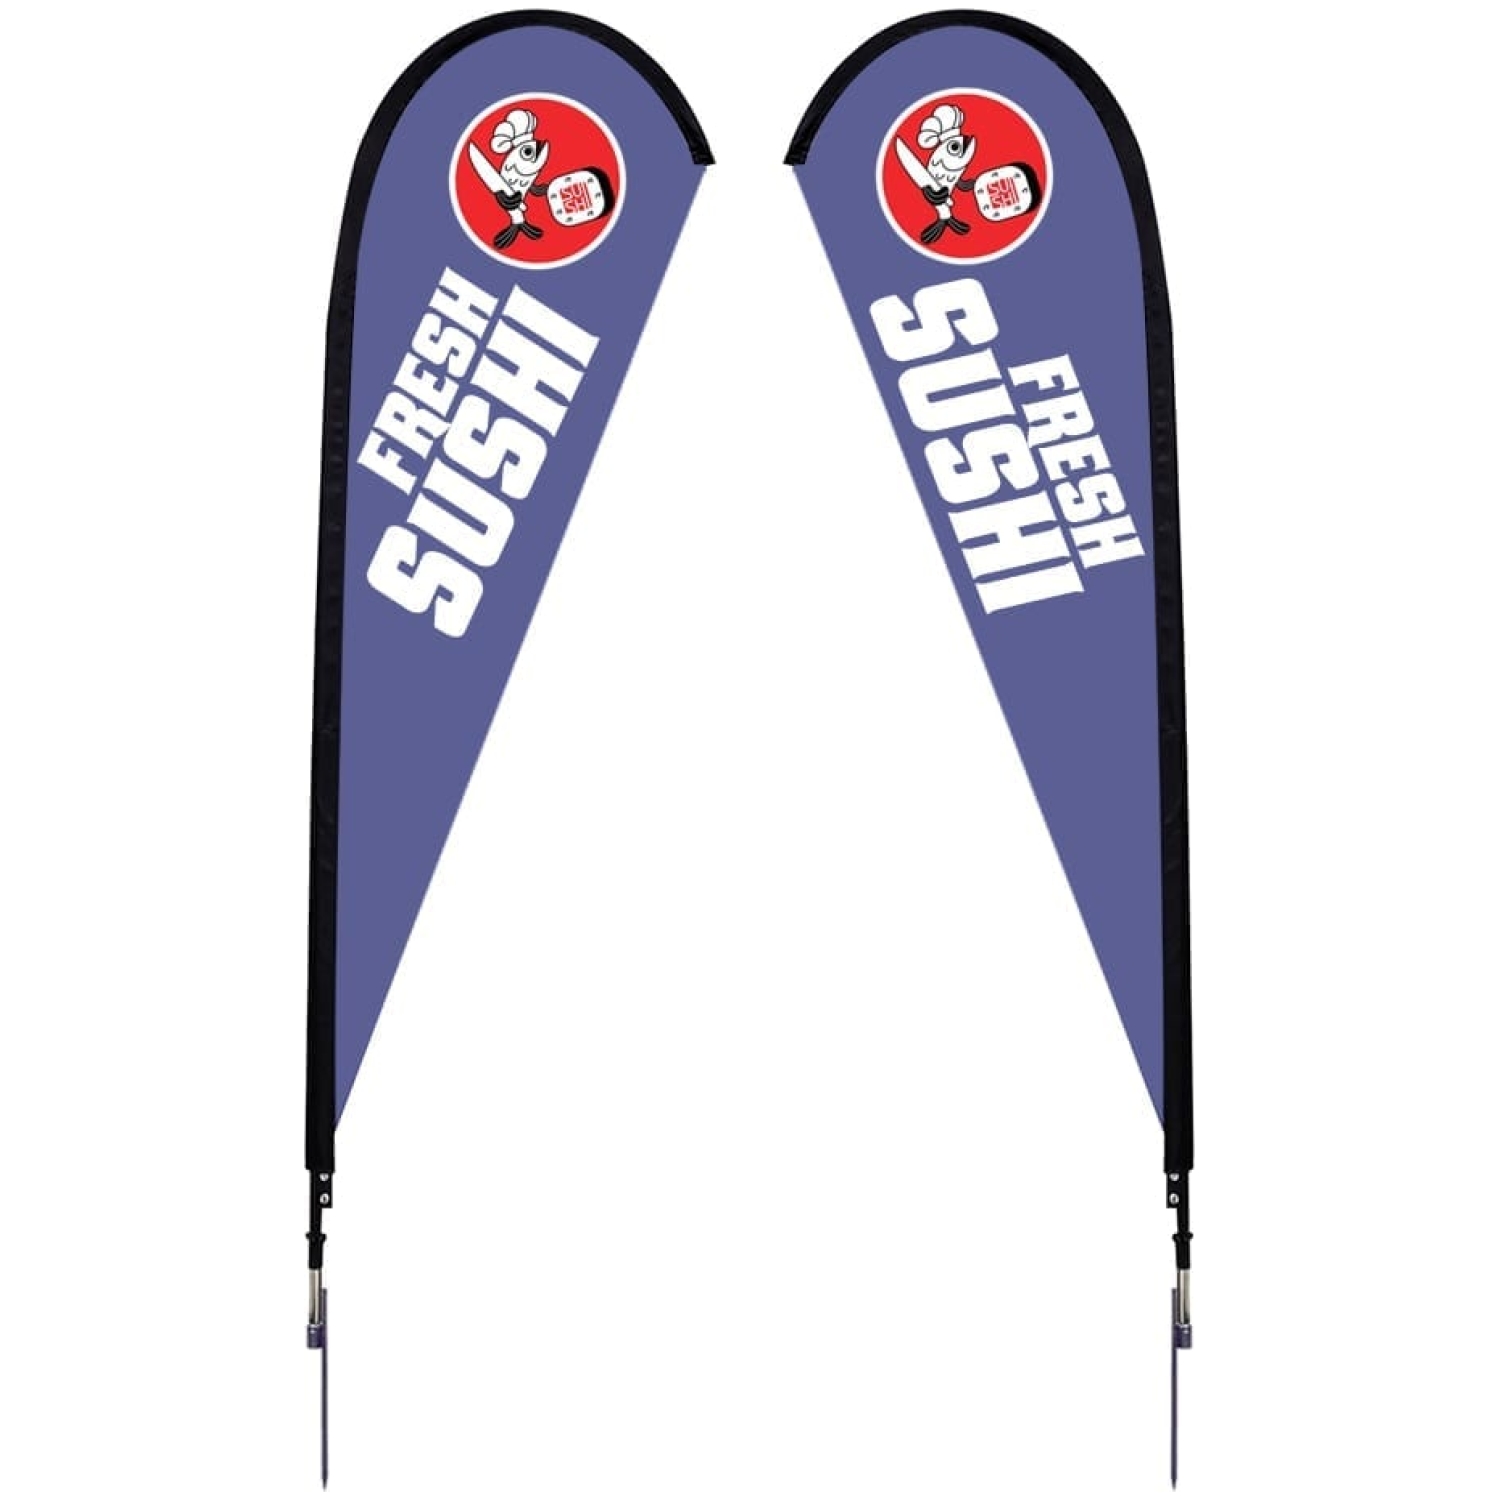 Sunbird Stand —  Medium 9 Ft. Spike Base, Double-sided Graphic Package (stand & Graphic)